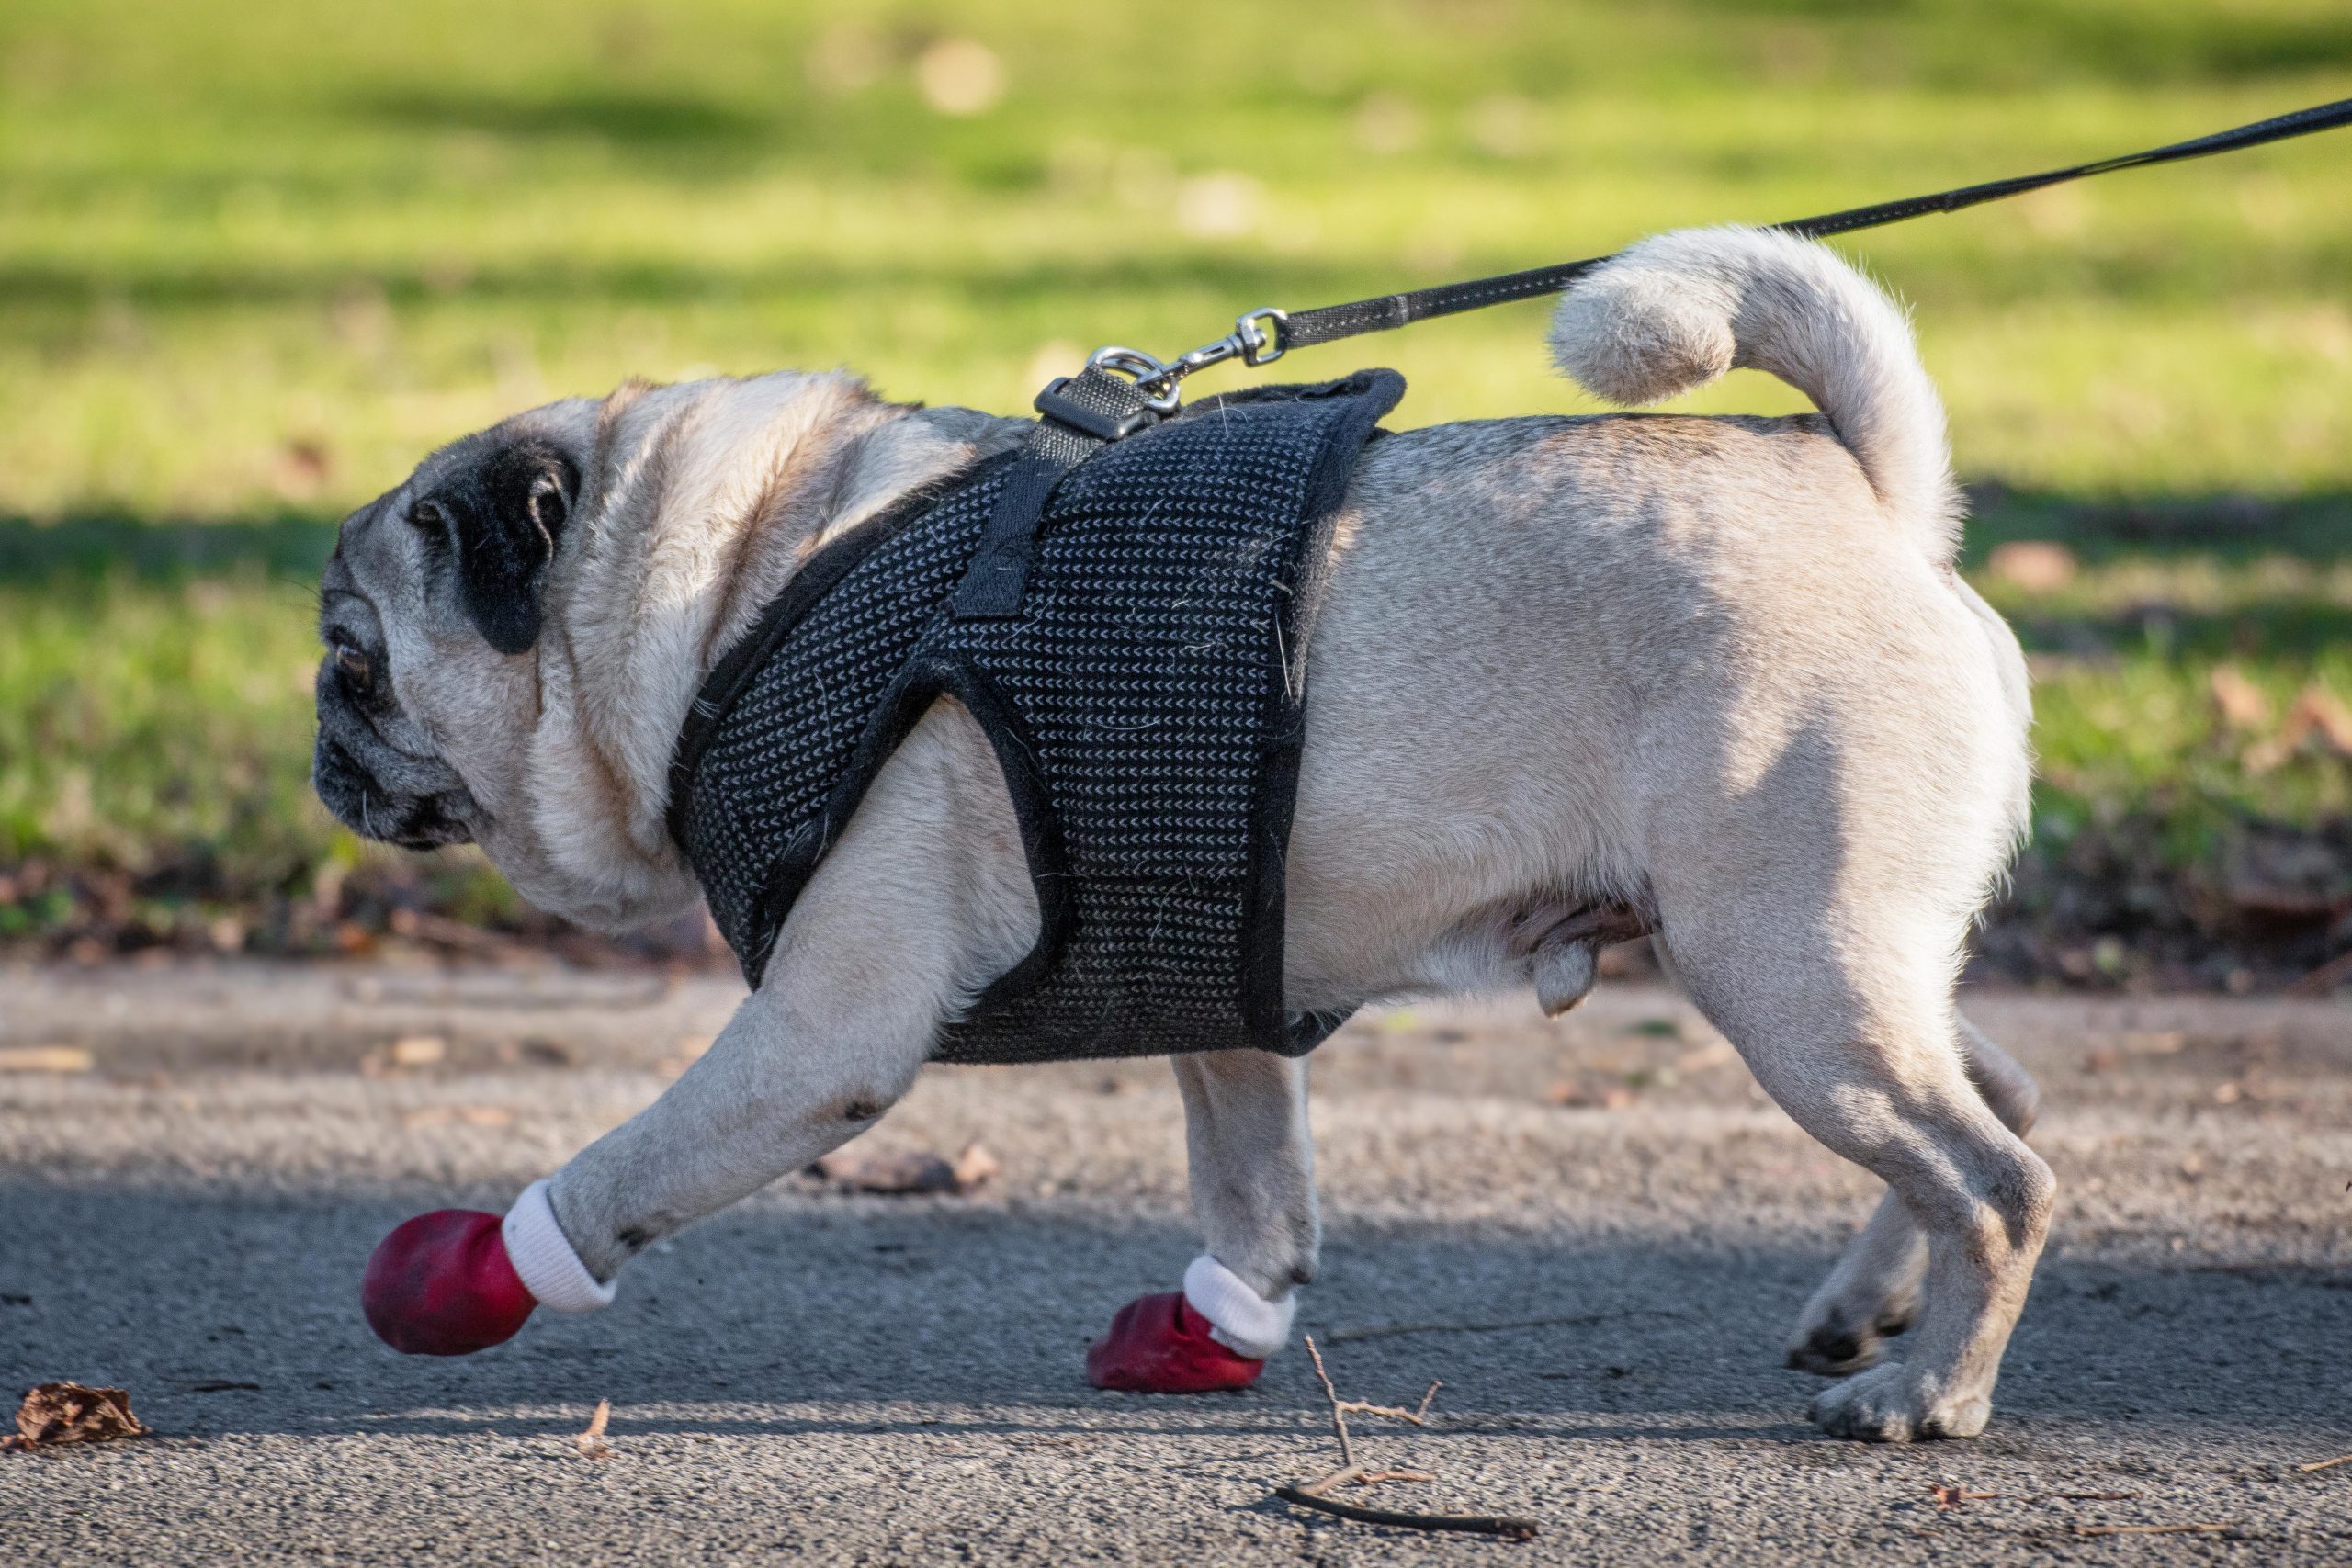 Pug dog in red dog boots and on a leash walking in the park.